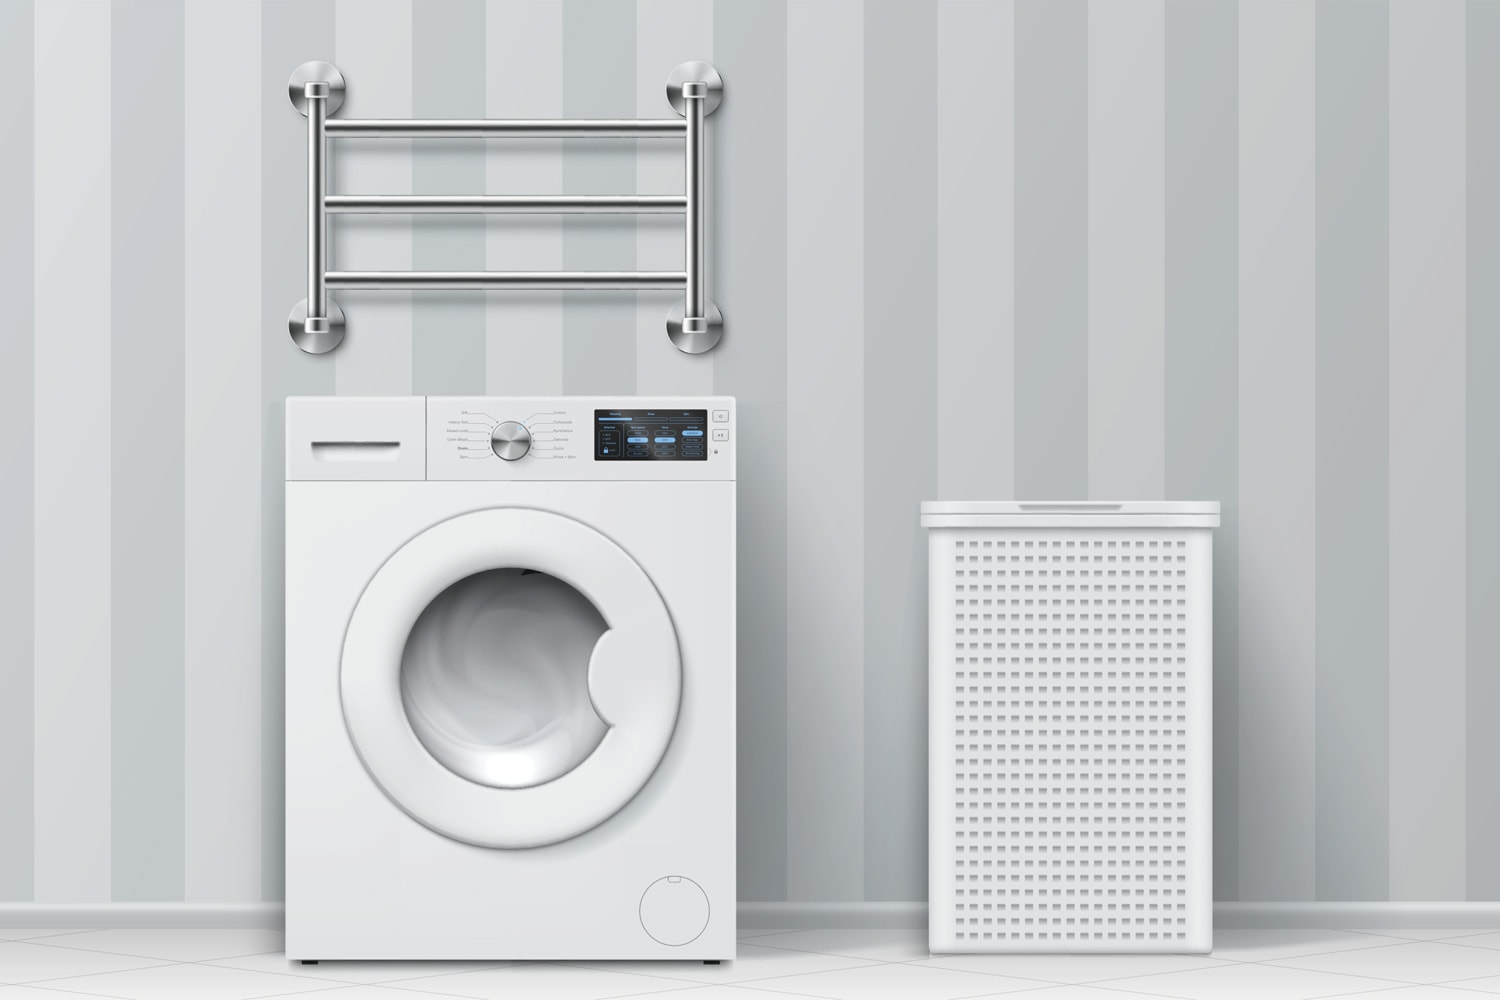 Contemporary electric household appliance for clothes cleaning at bathroom interior